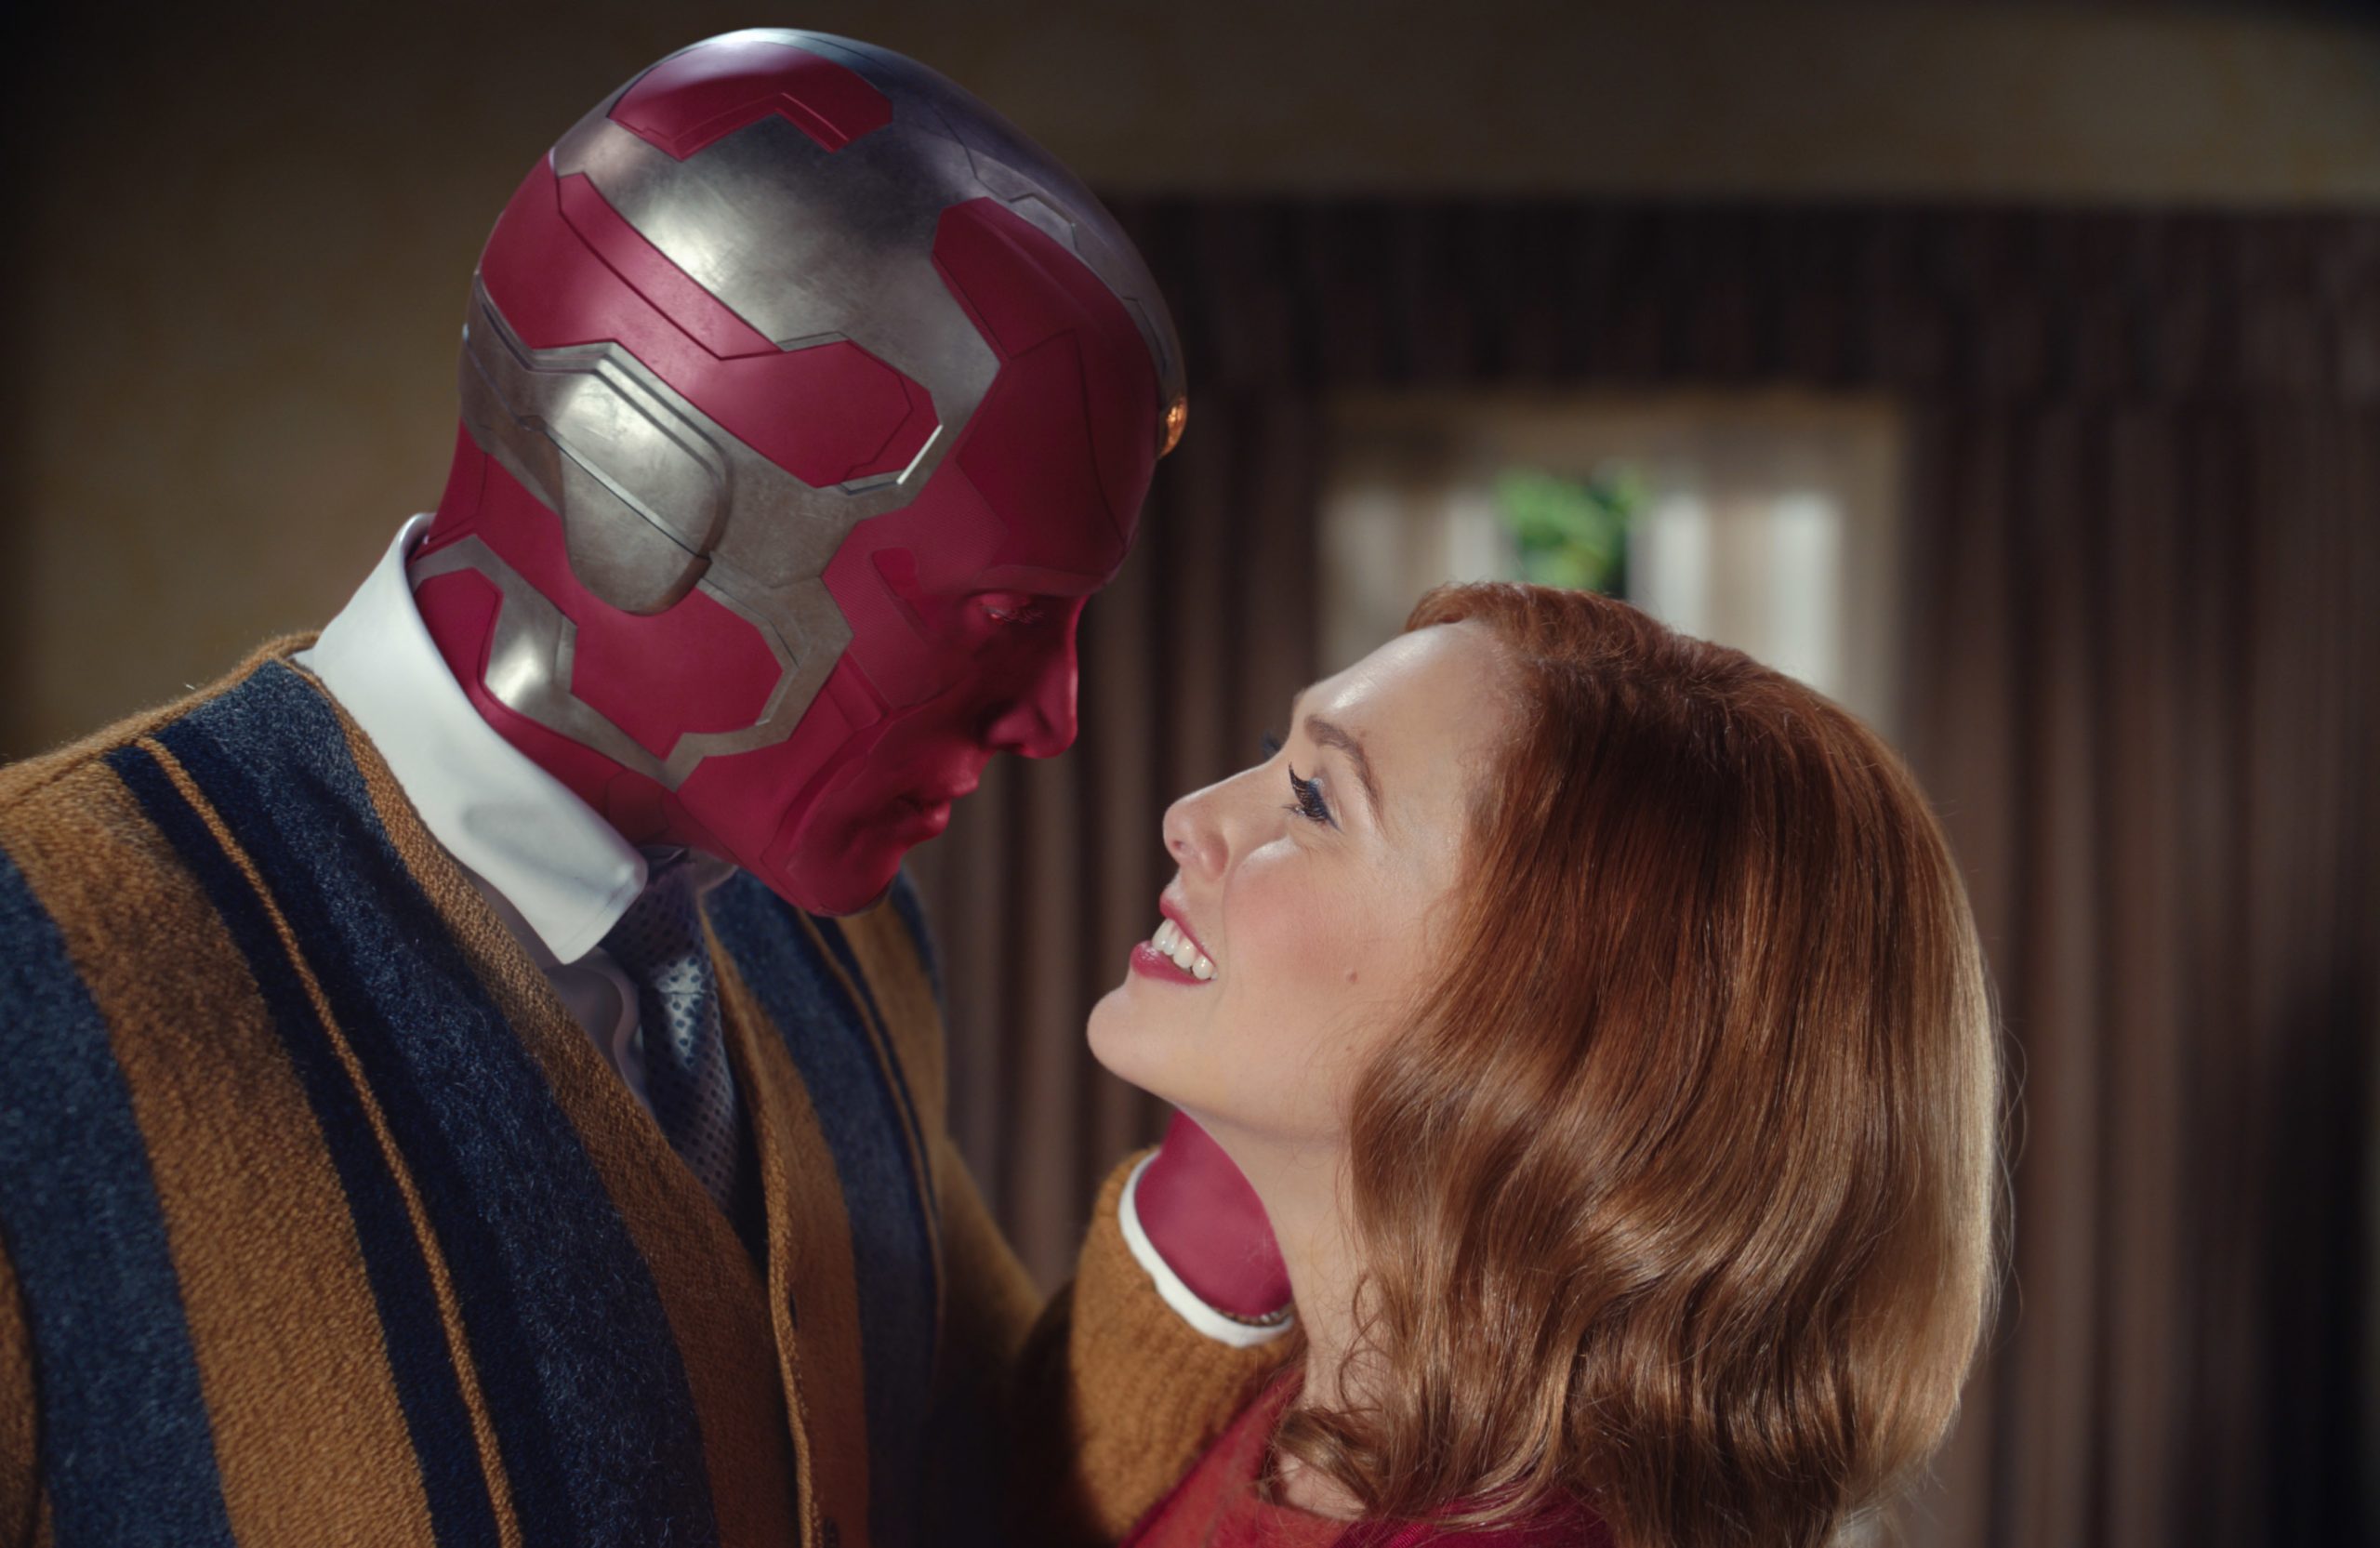 Paul Bettany as Vision and Olsen as Wanda in 'WandaVision'